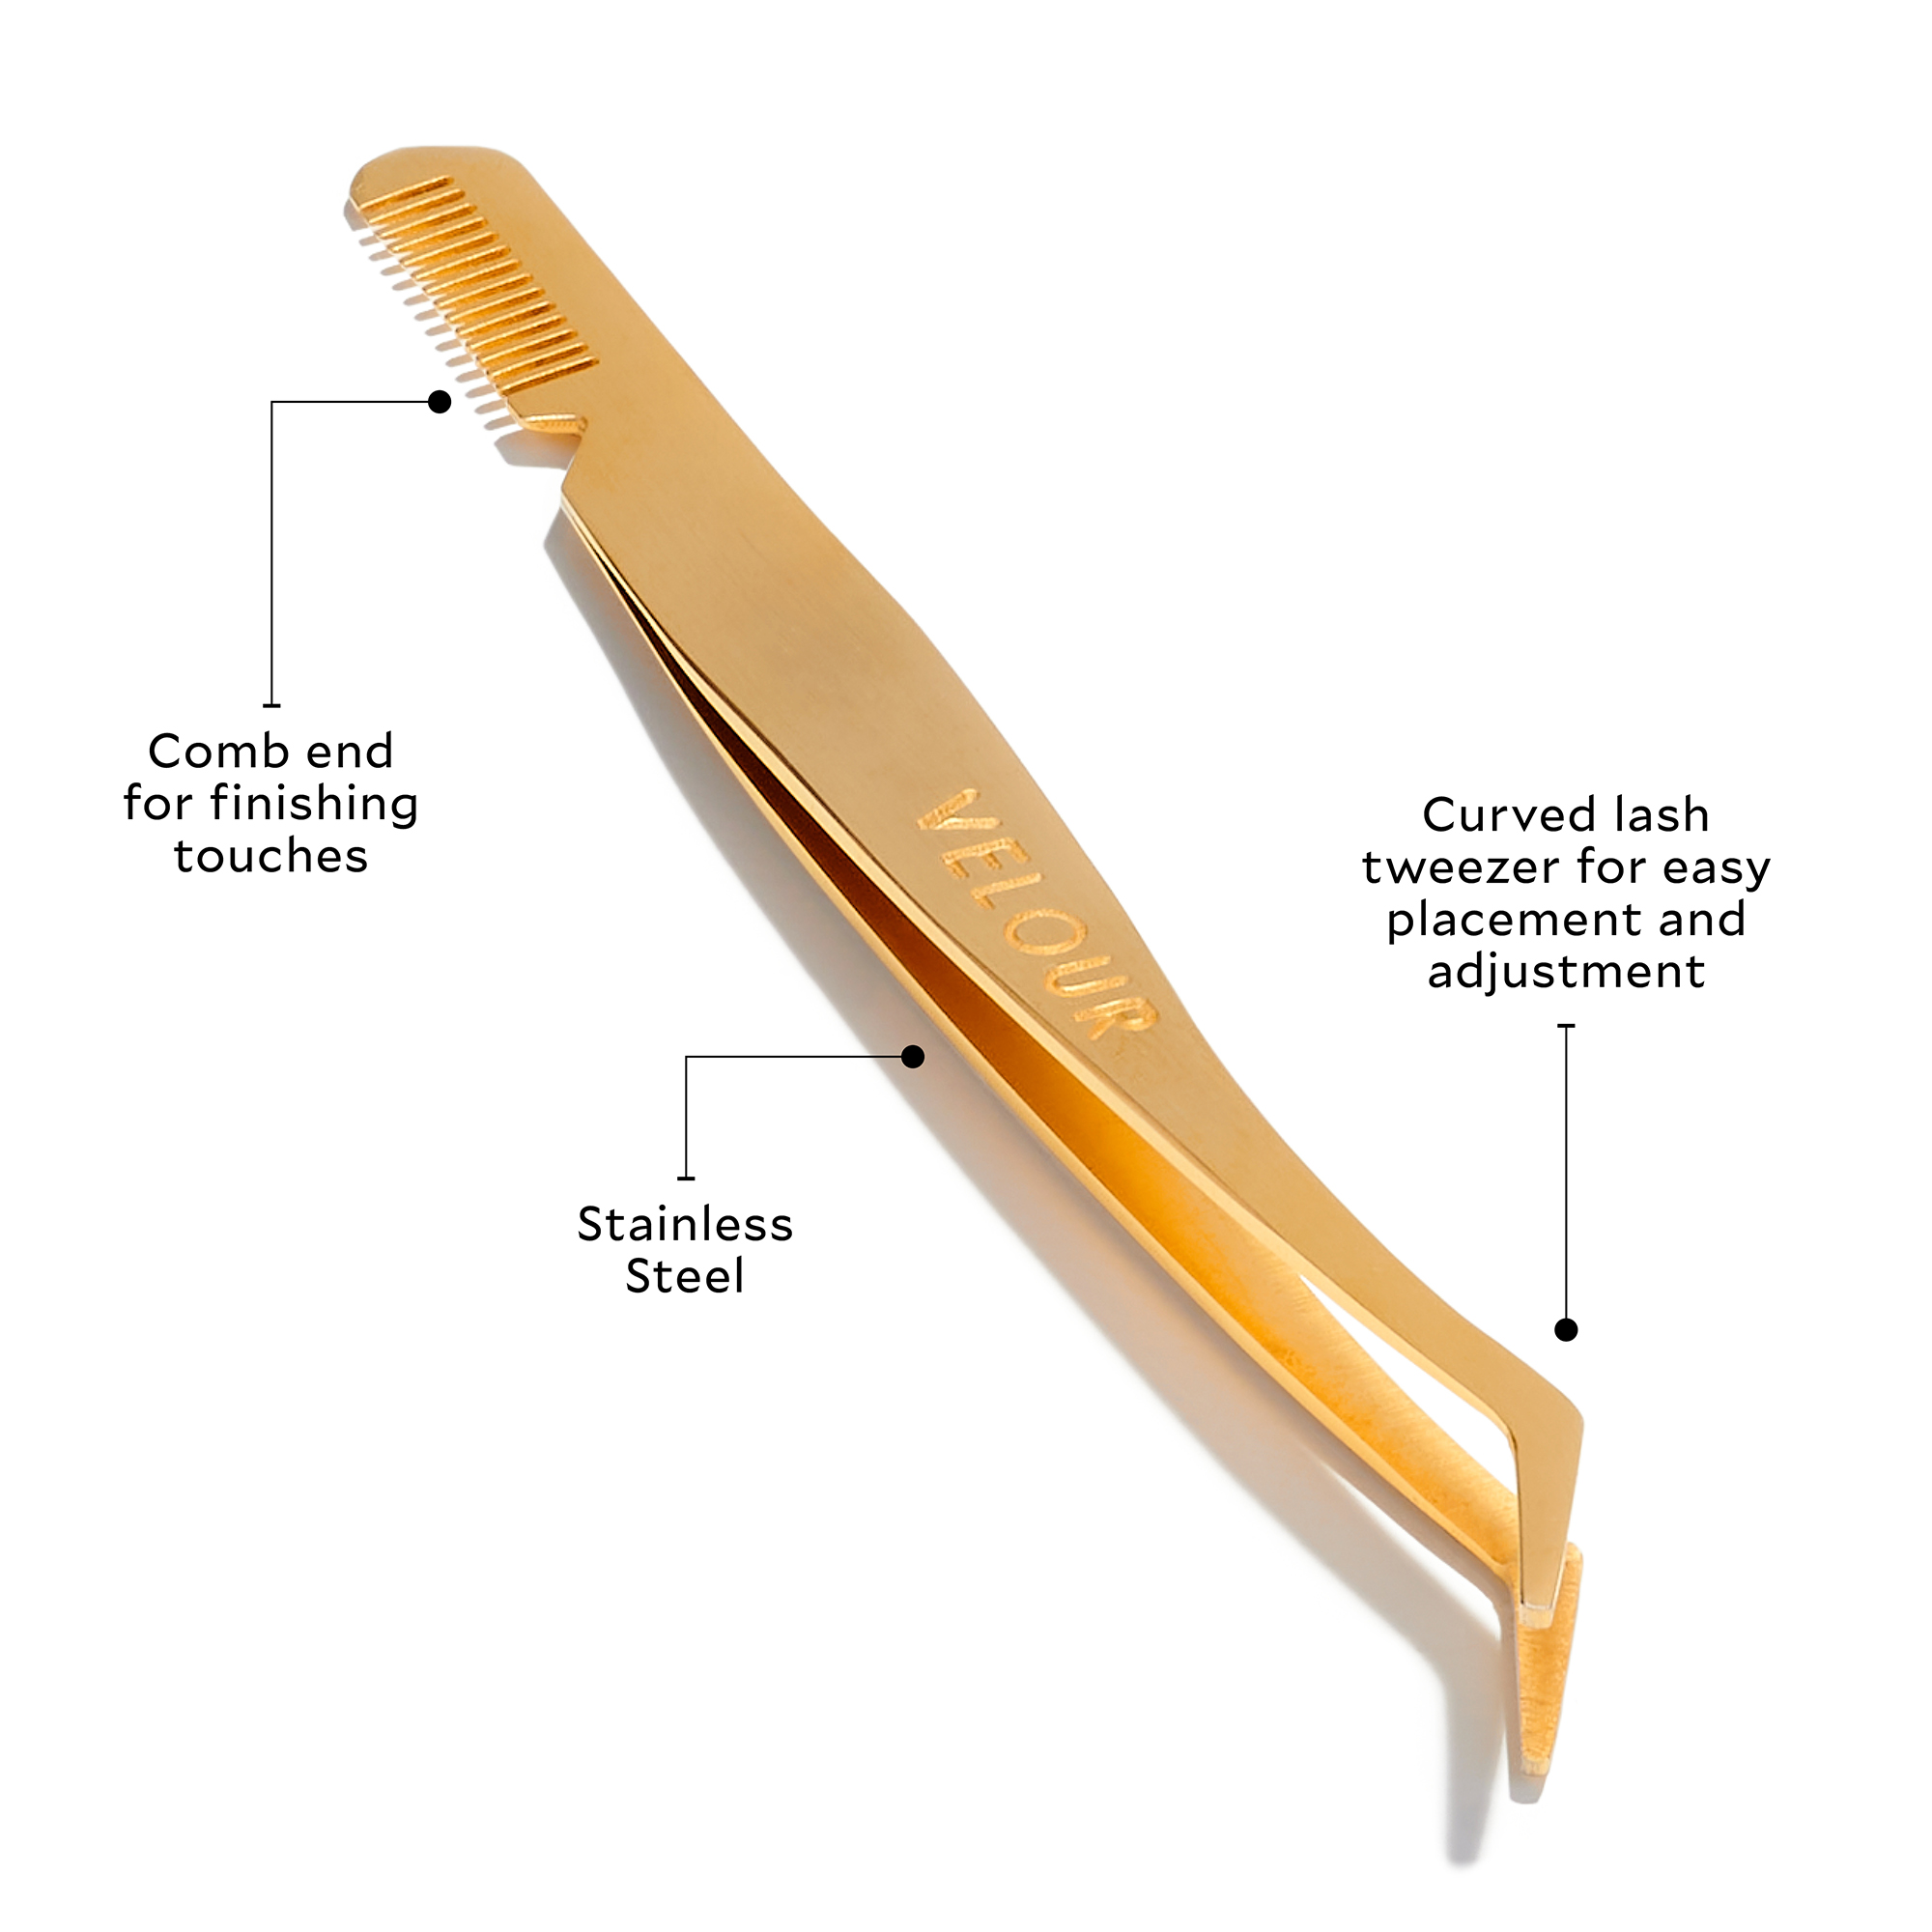 comb end for finishing touches, stainless steal, curved lash tweezer for easy placement and adjustment